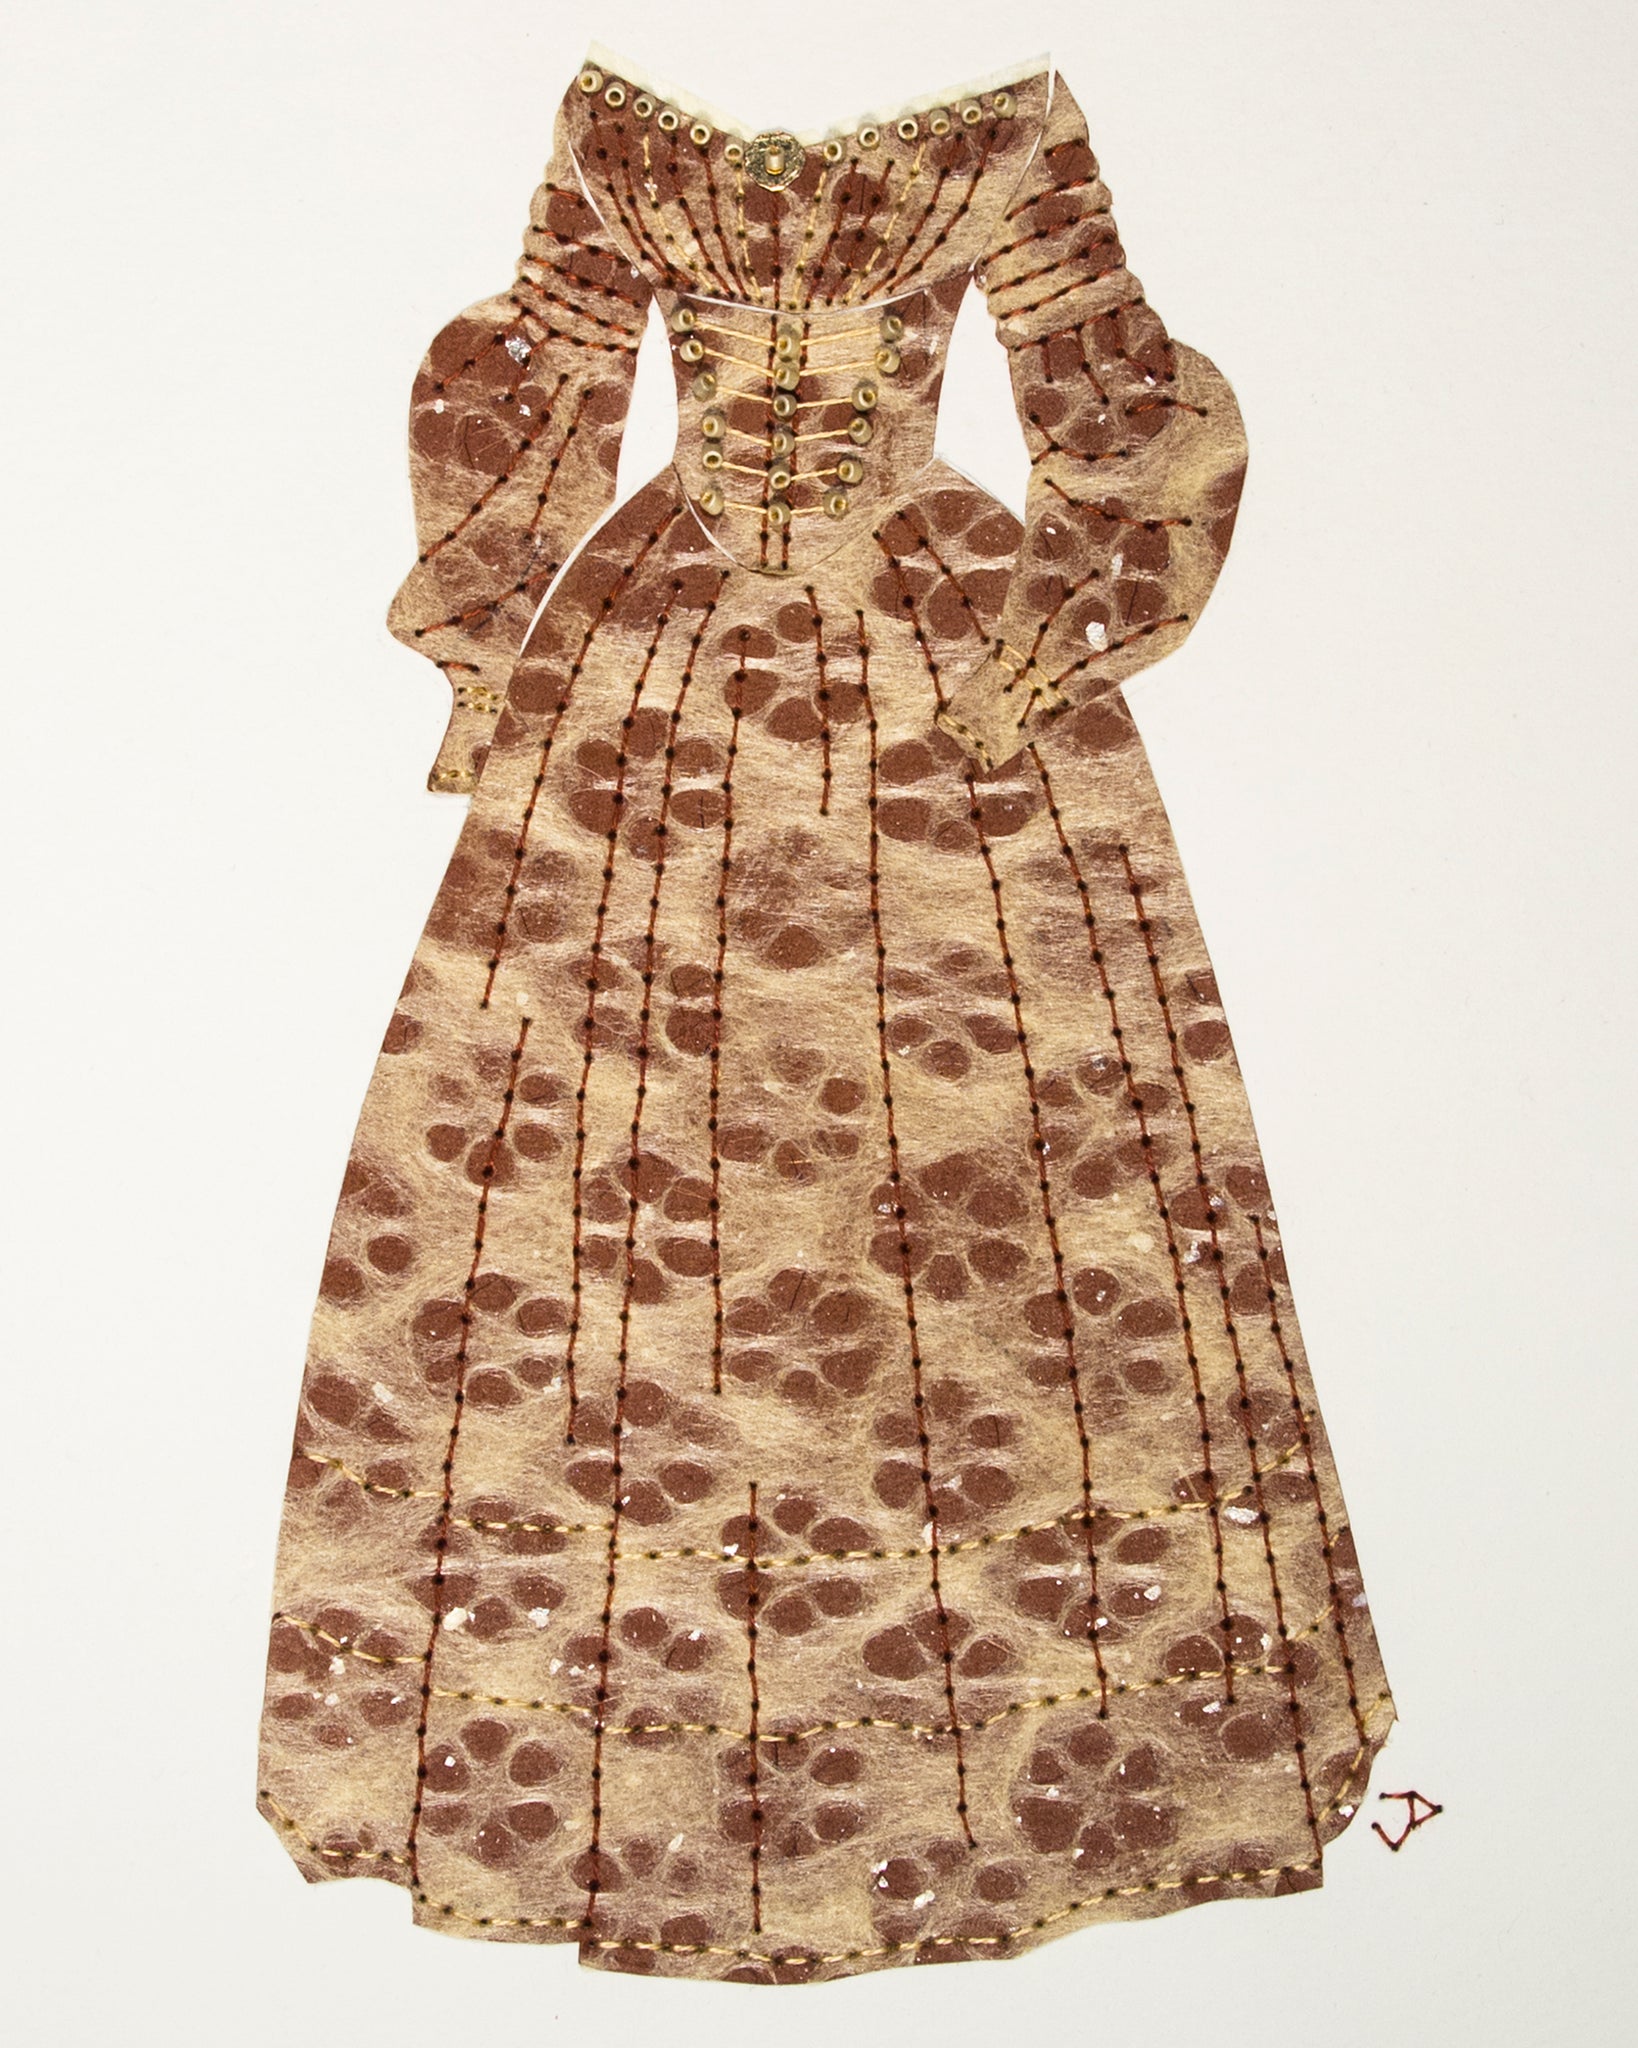 Dress #058: Early Victorian day dress in brown. 2018